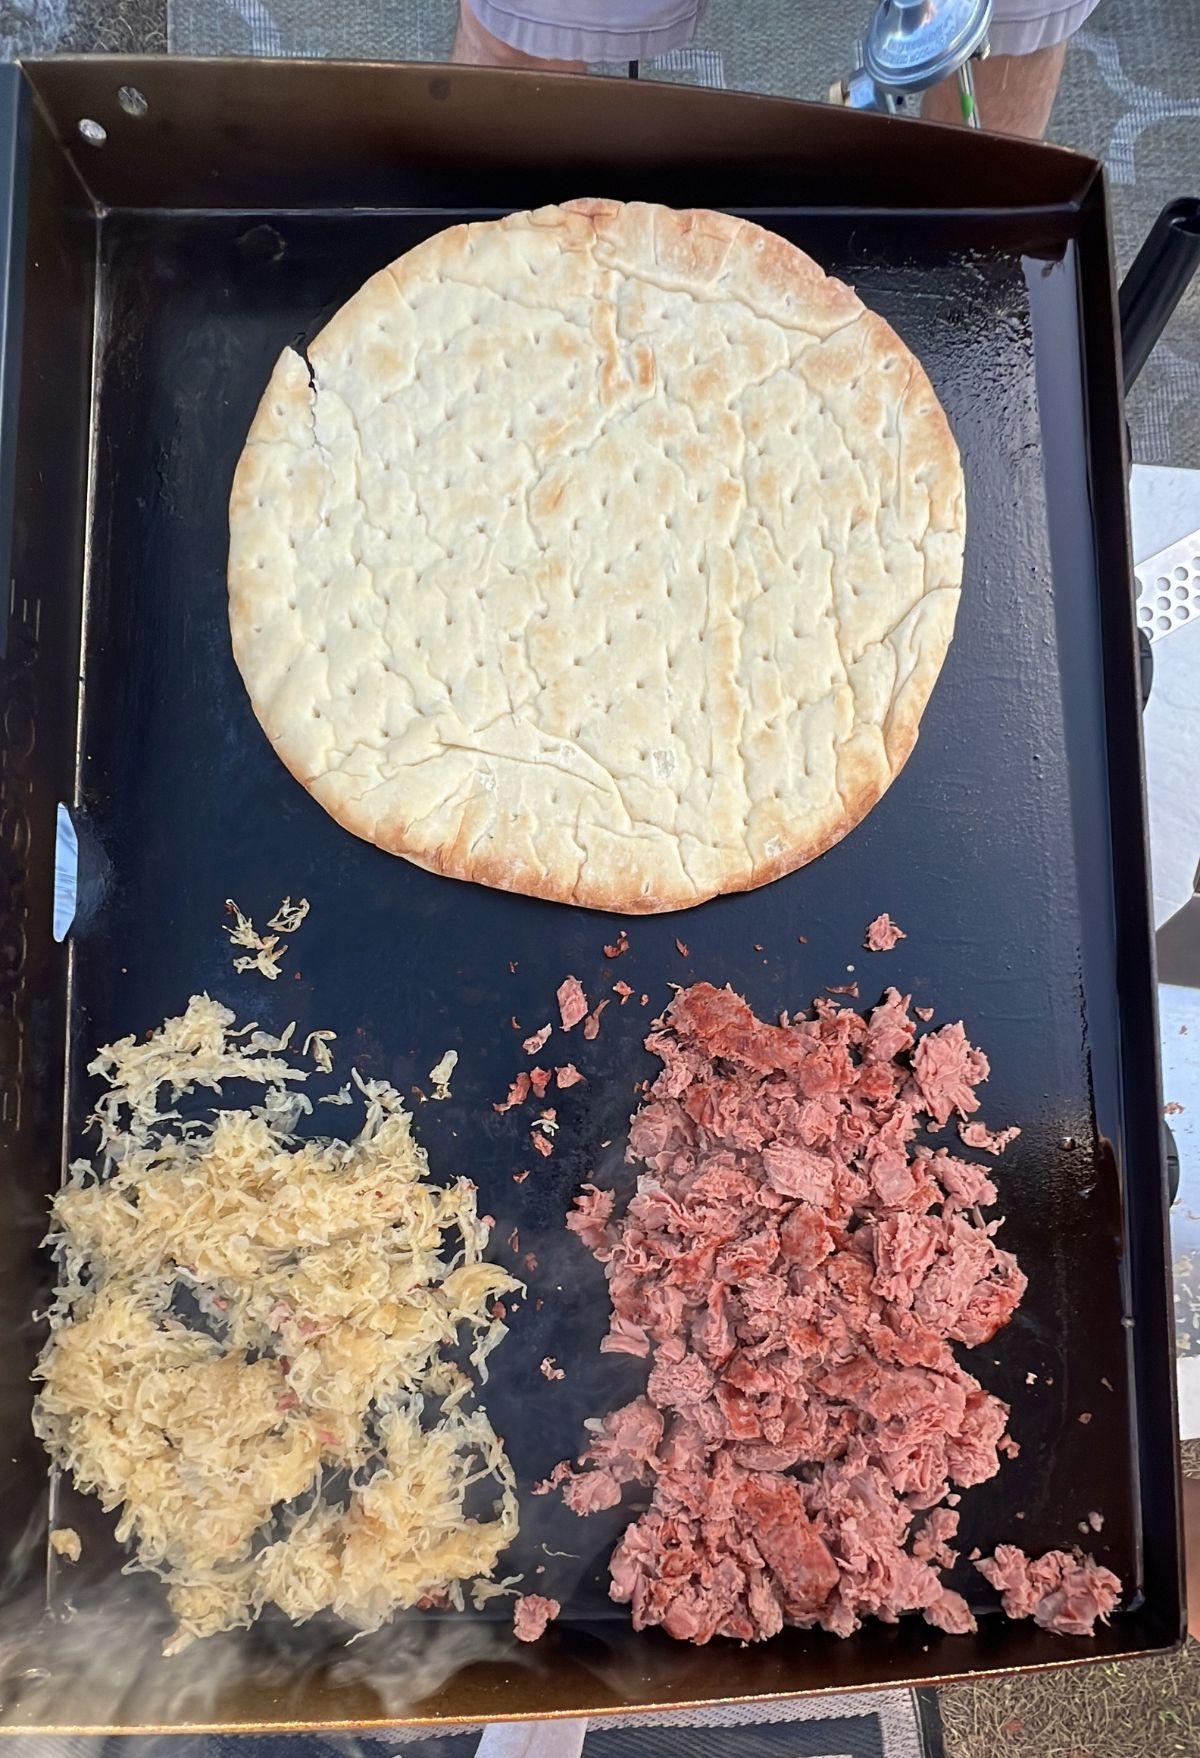 A pizza with meat and cheese on a baking sheet.